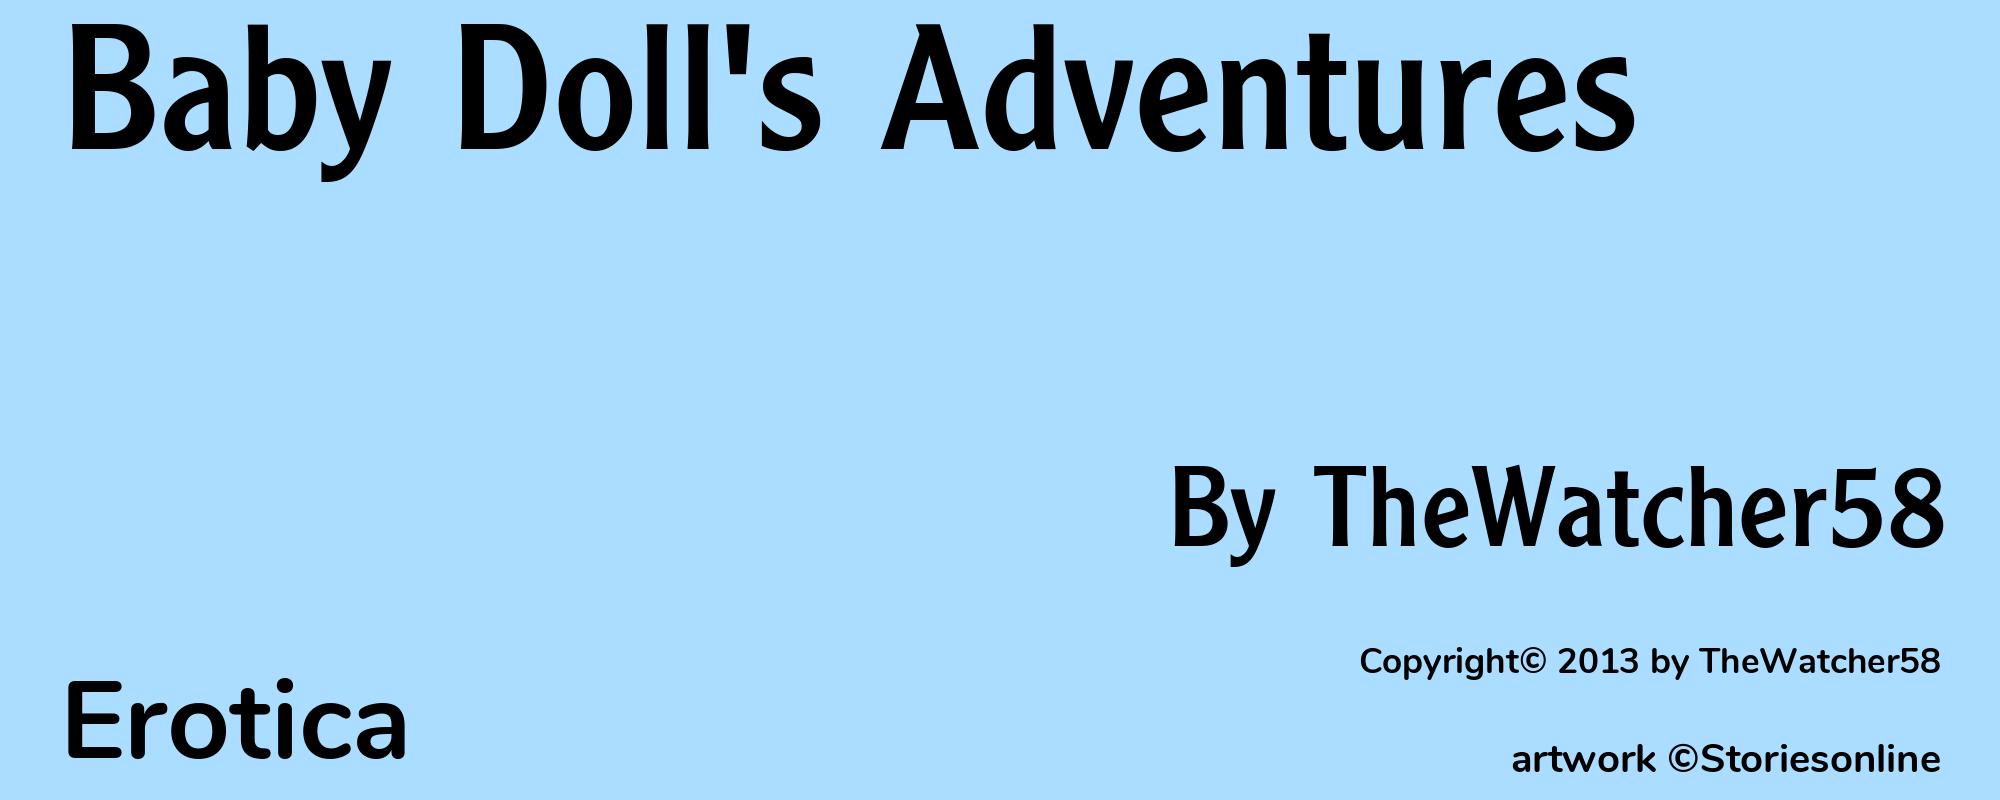 Baby Doll's Adventures - Cover